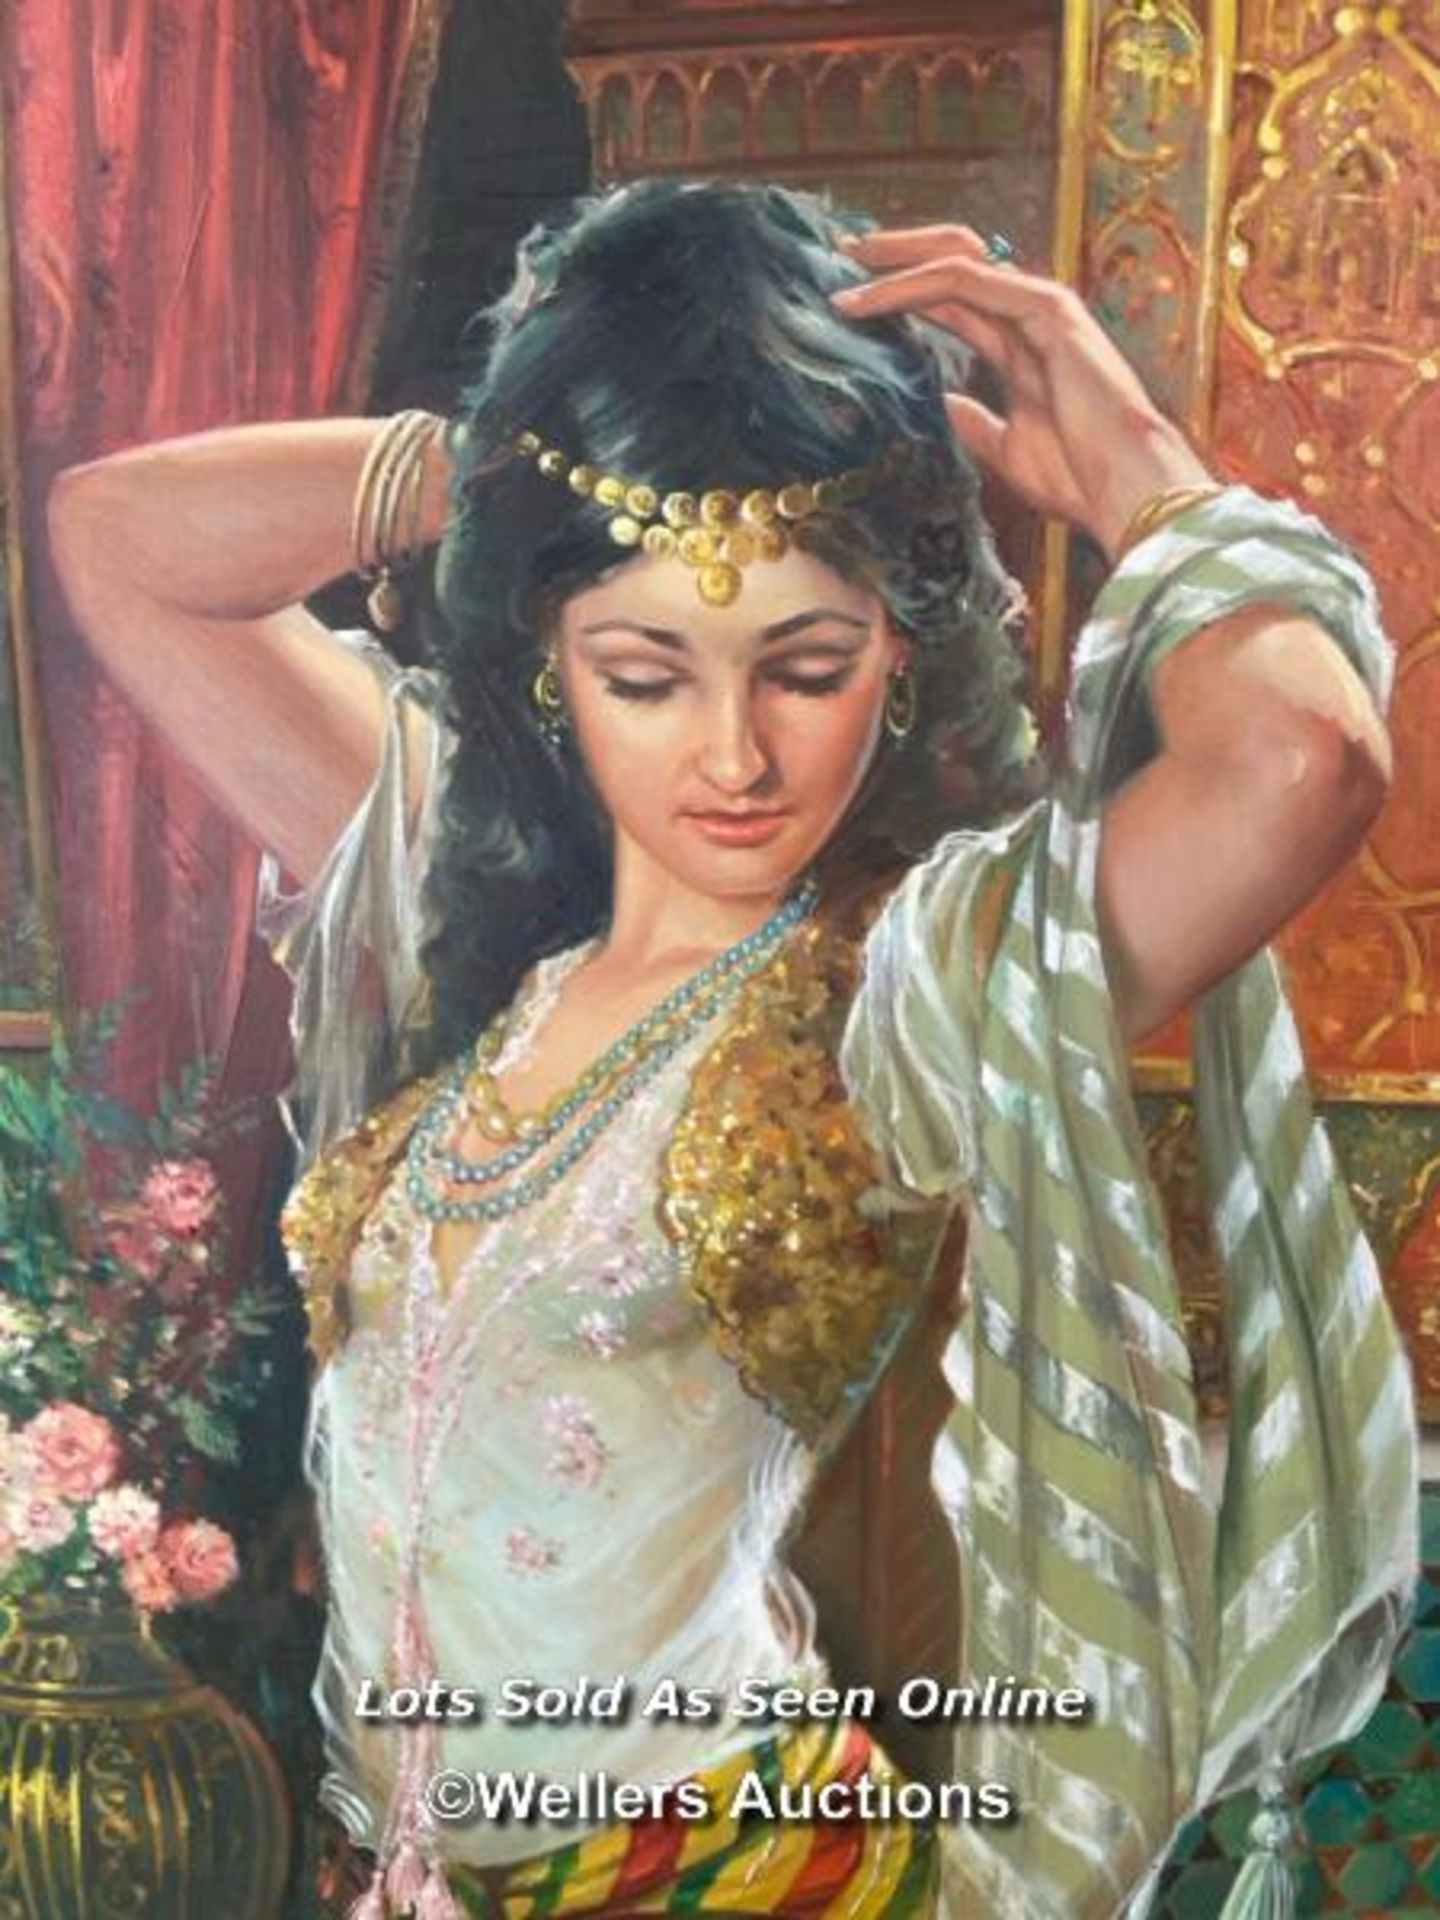 OIL ON CANVAS PAINTING OF AN ARABIAN LADY, BY MORAL, IN A DECORATIVE GILT FRAME, 47 X 60CM - Image 2 of 4